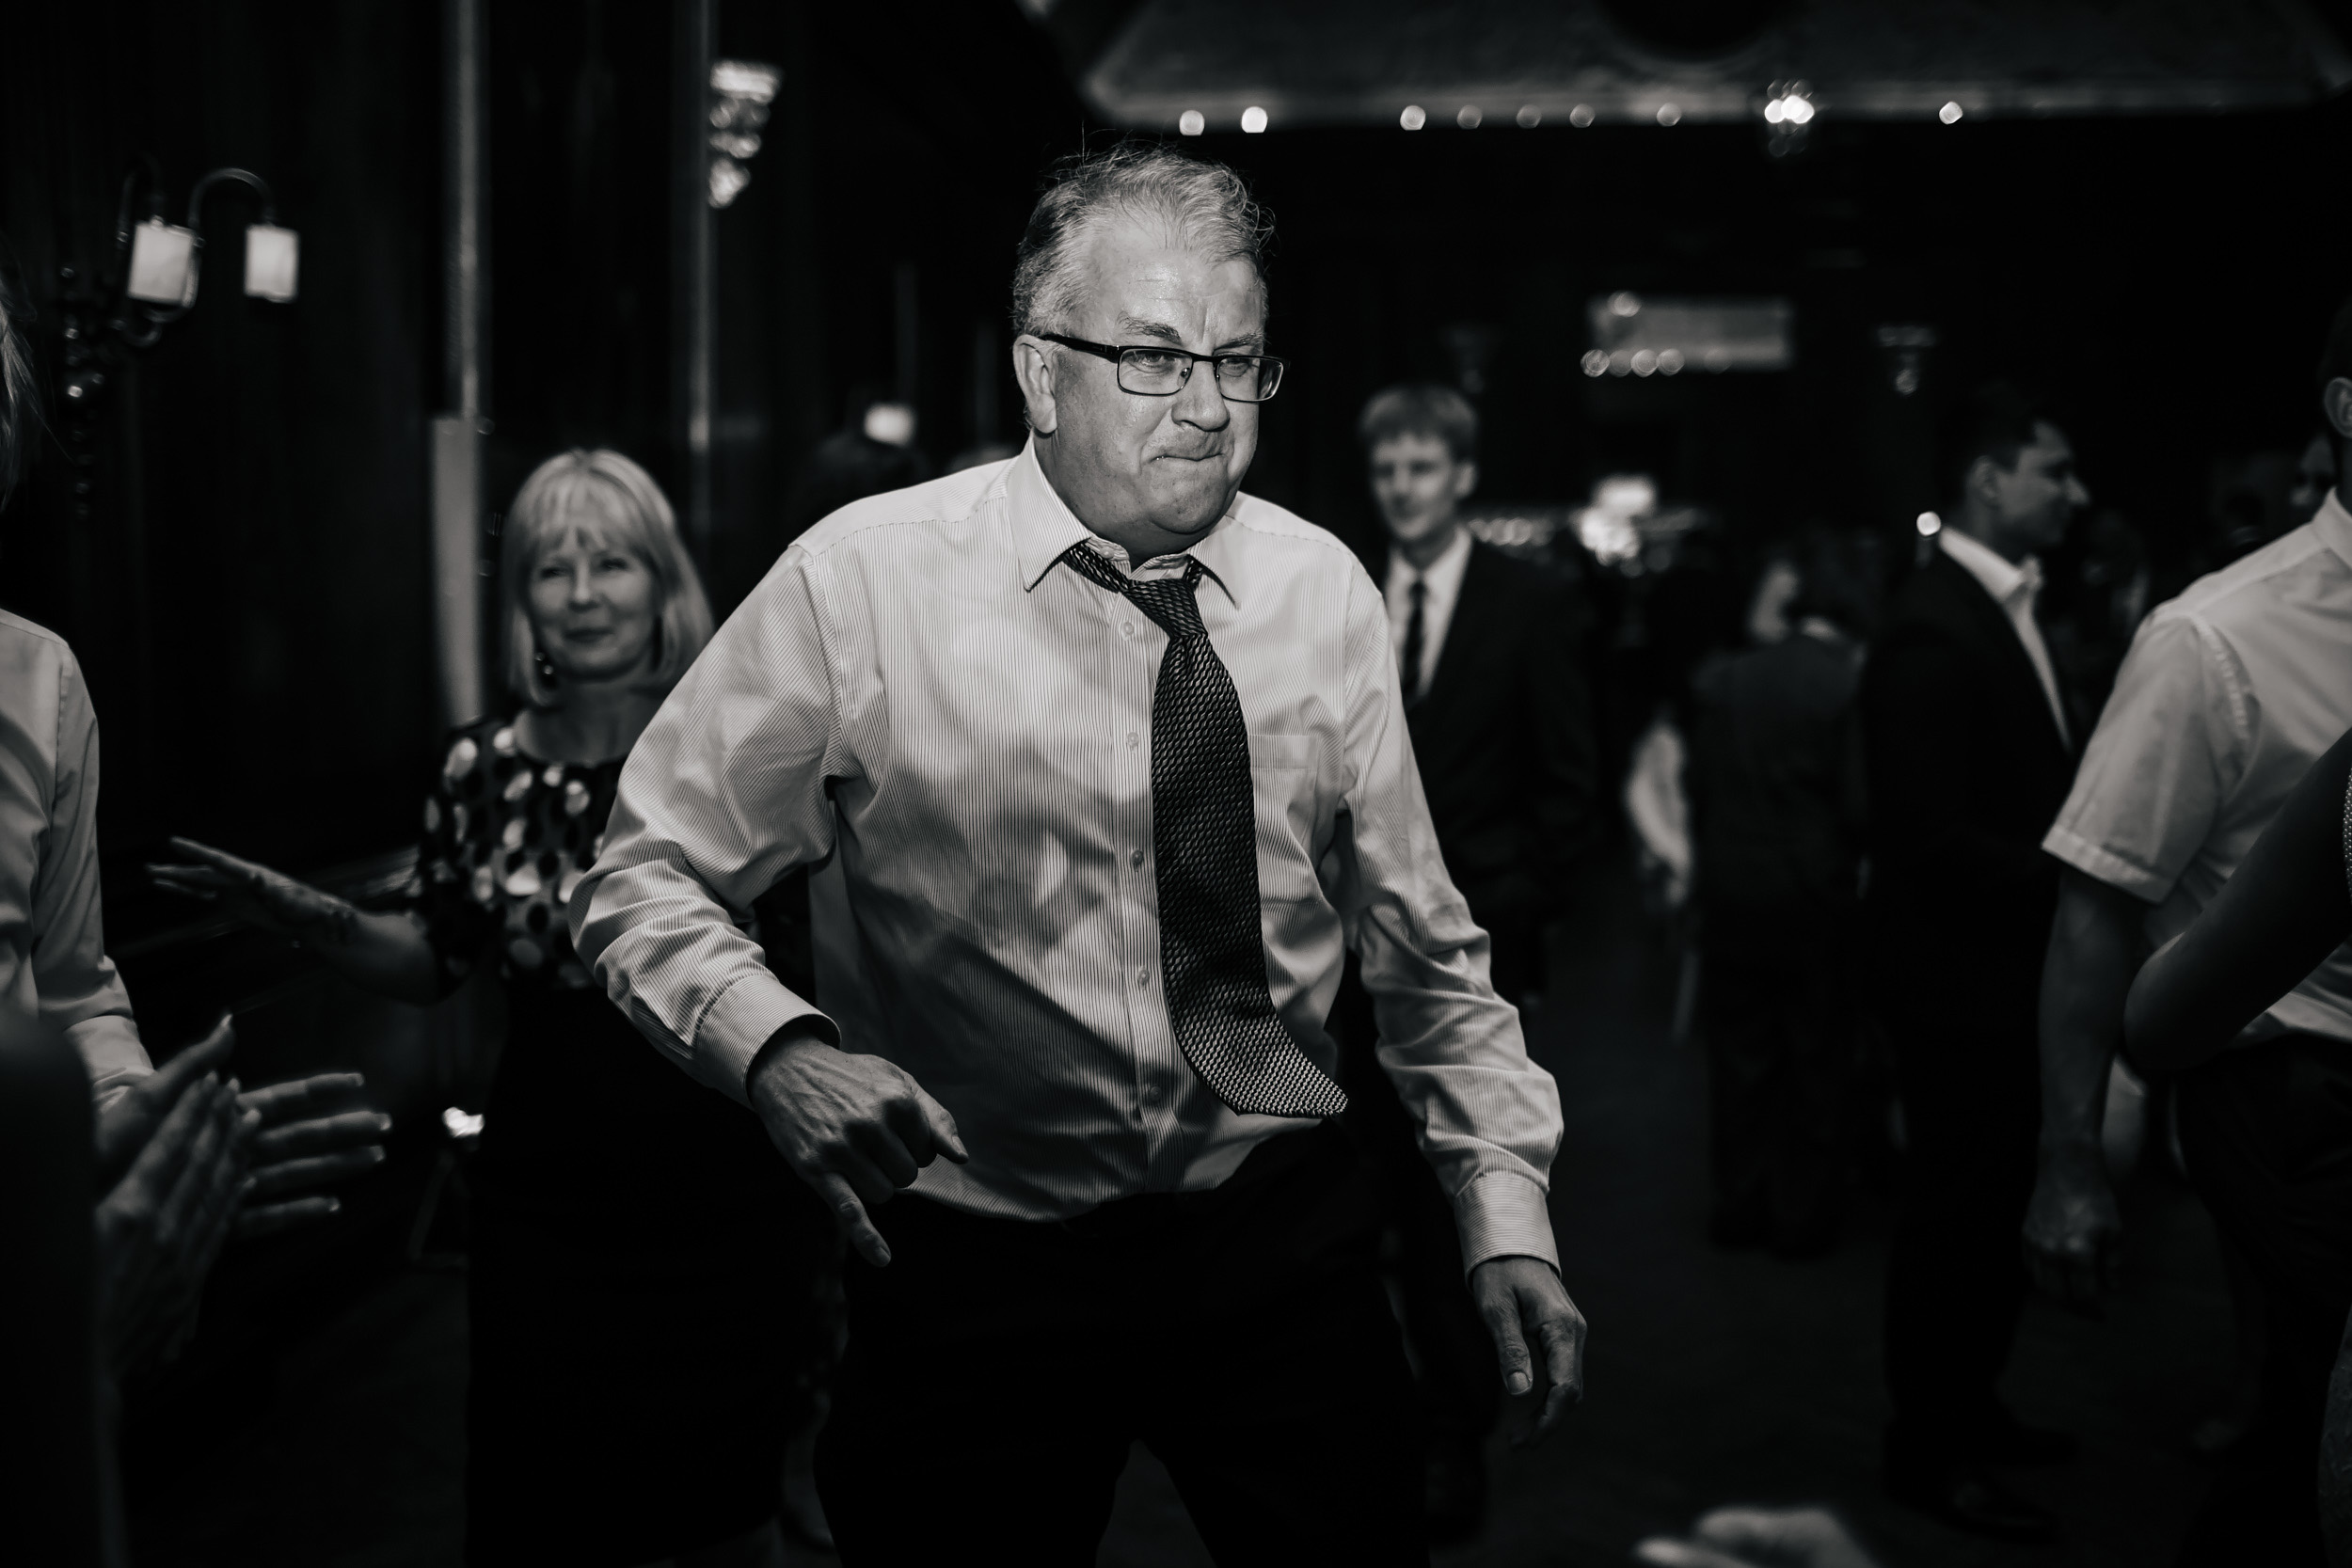 Guest dancing at a wedding party